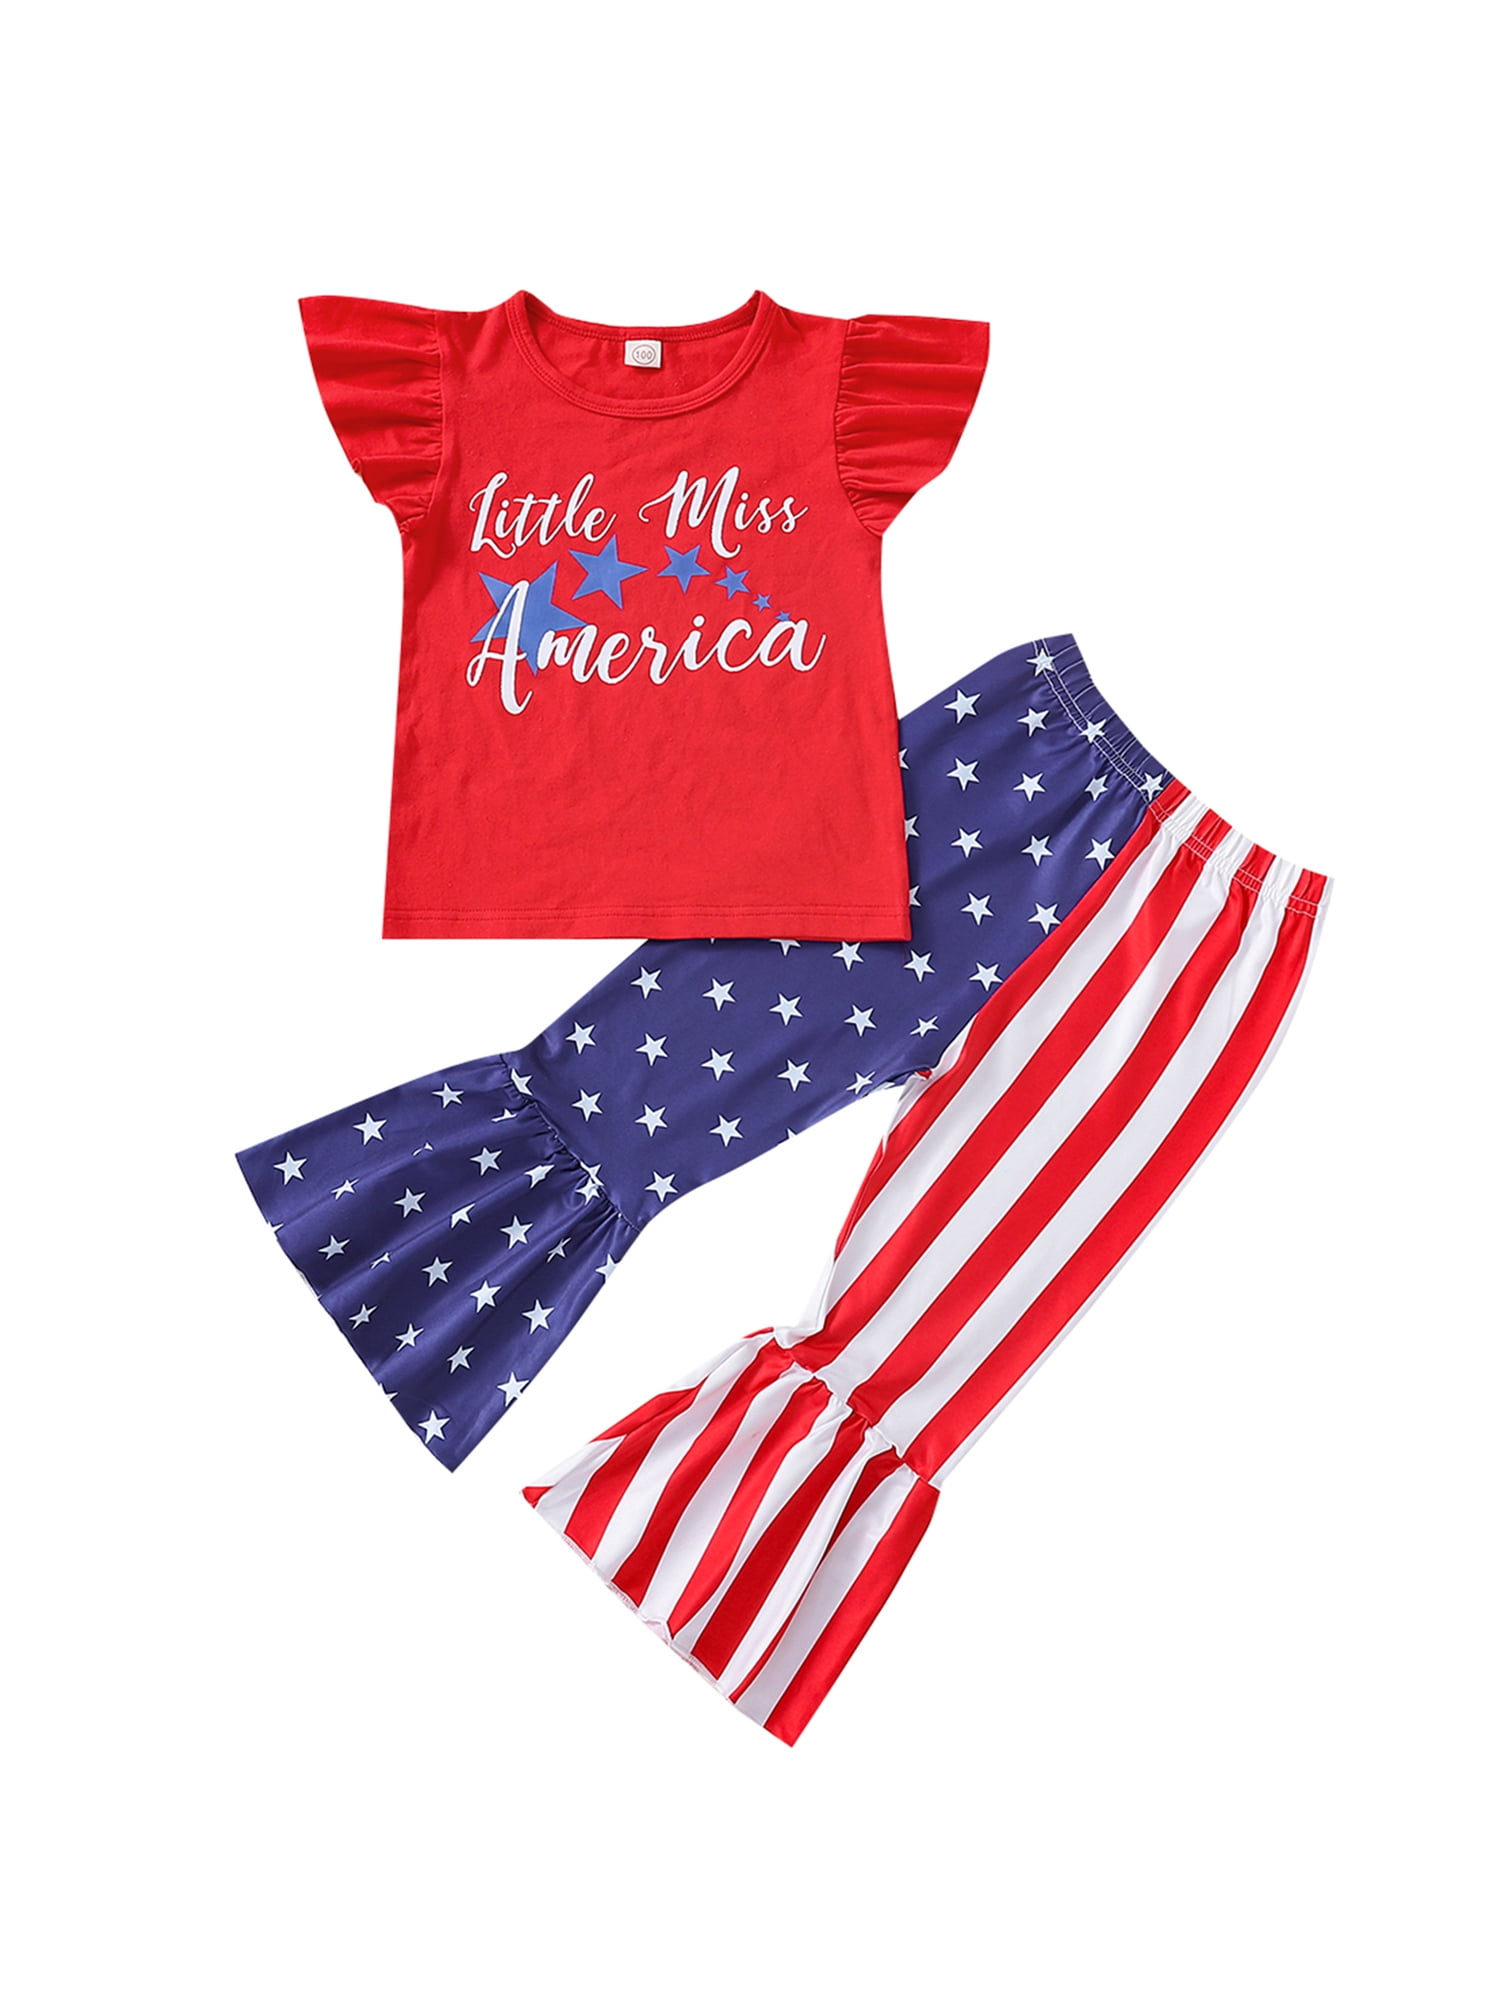 2PC Infant Baby Boy Girl 4th Of July US Flag Print T-shirt Tops+Pants Outfit Set 